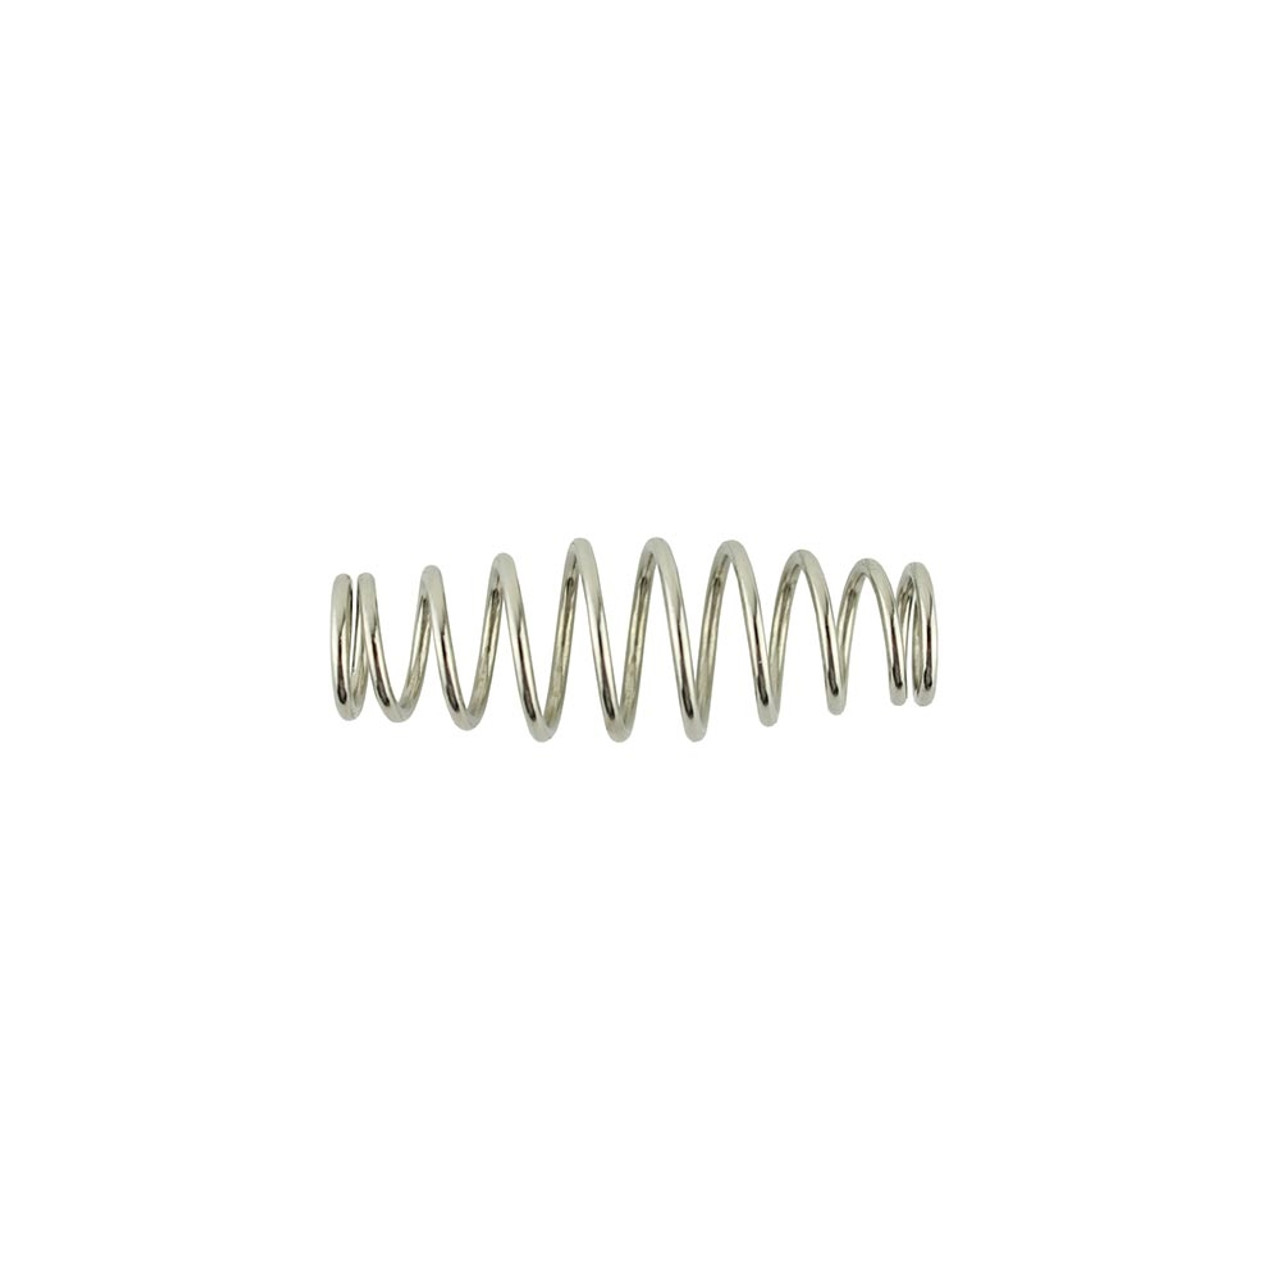 Replacement spring for Leponitt Mosaic Nippers.